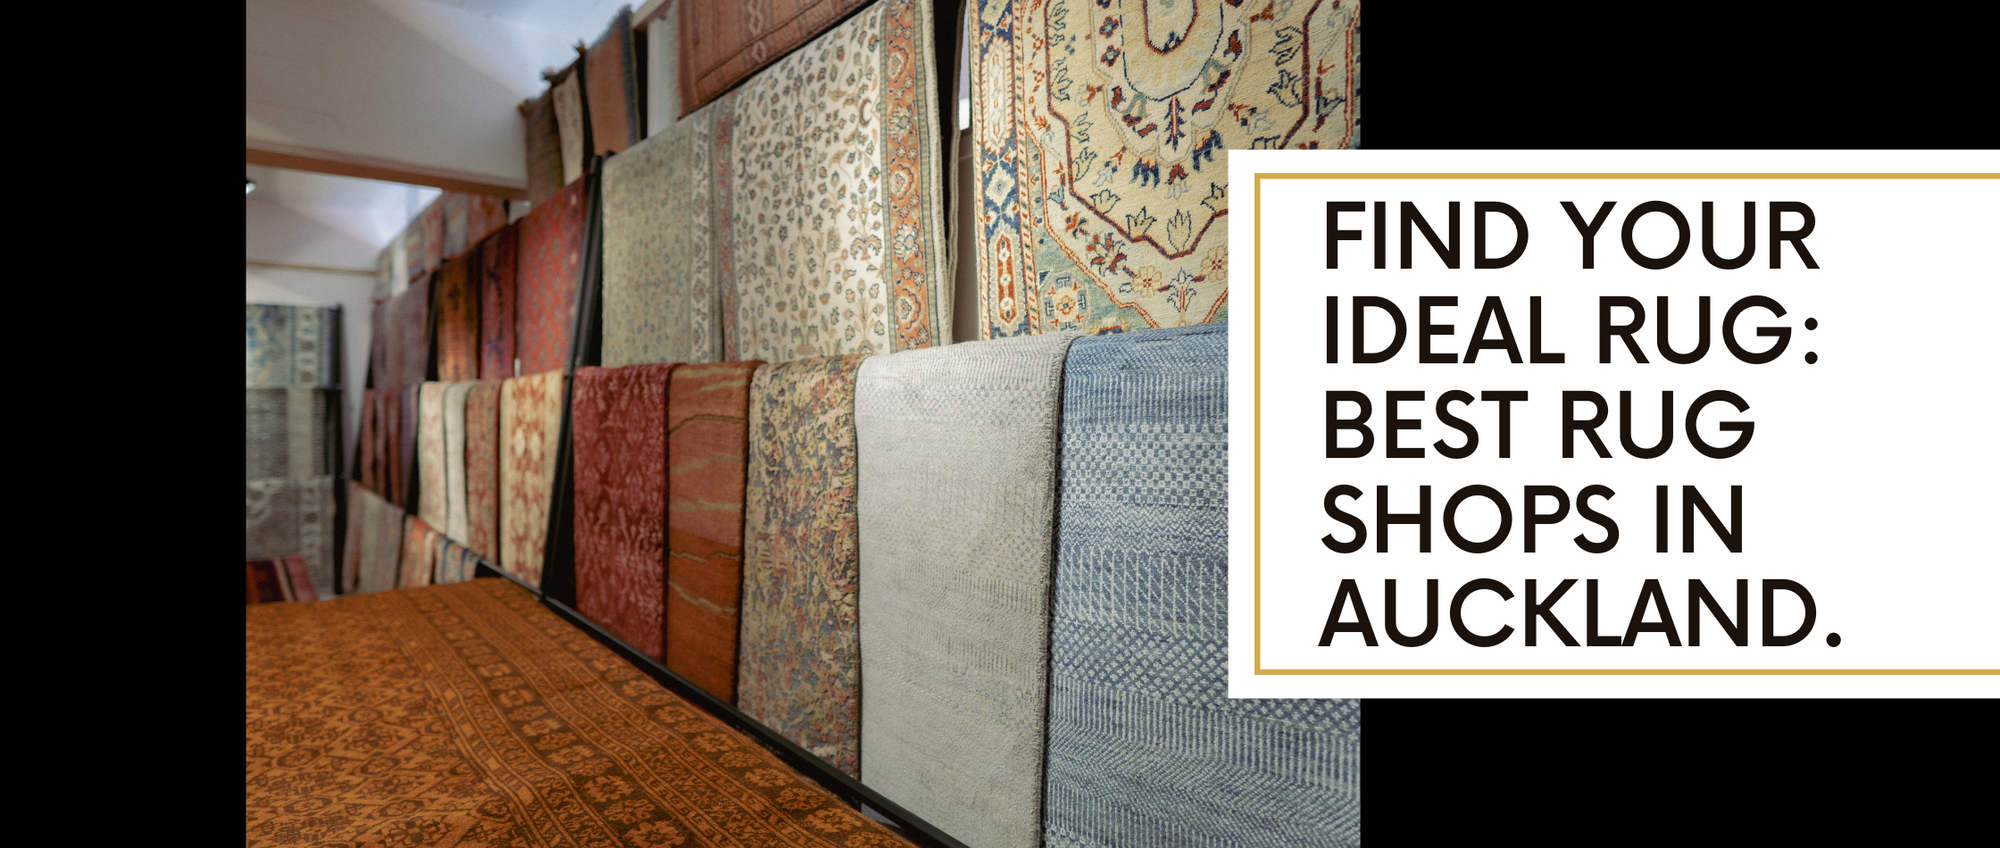 Find Your Ideal Rug at the Best Rug Shops in Auckland